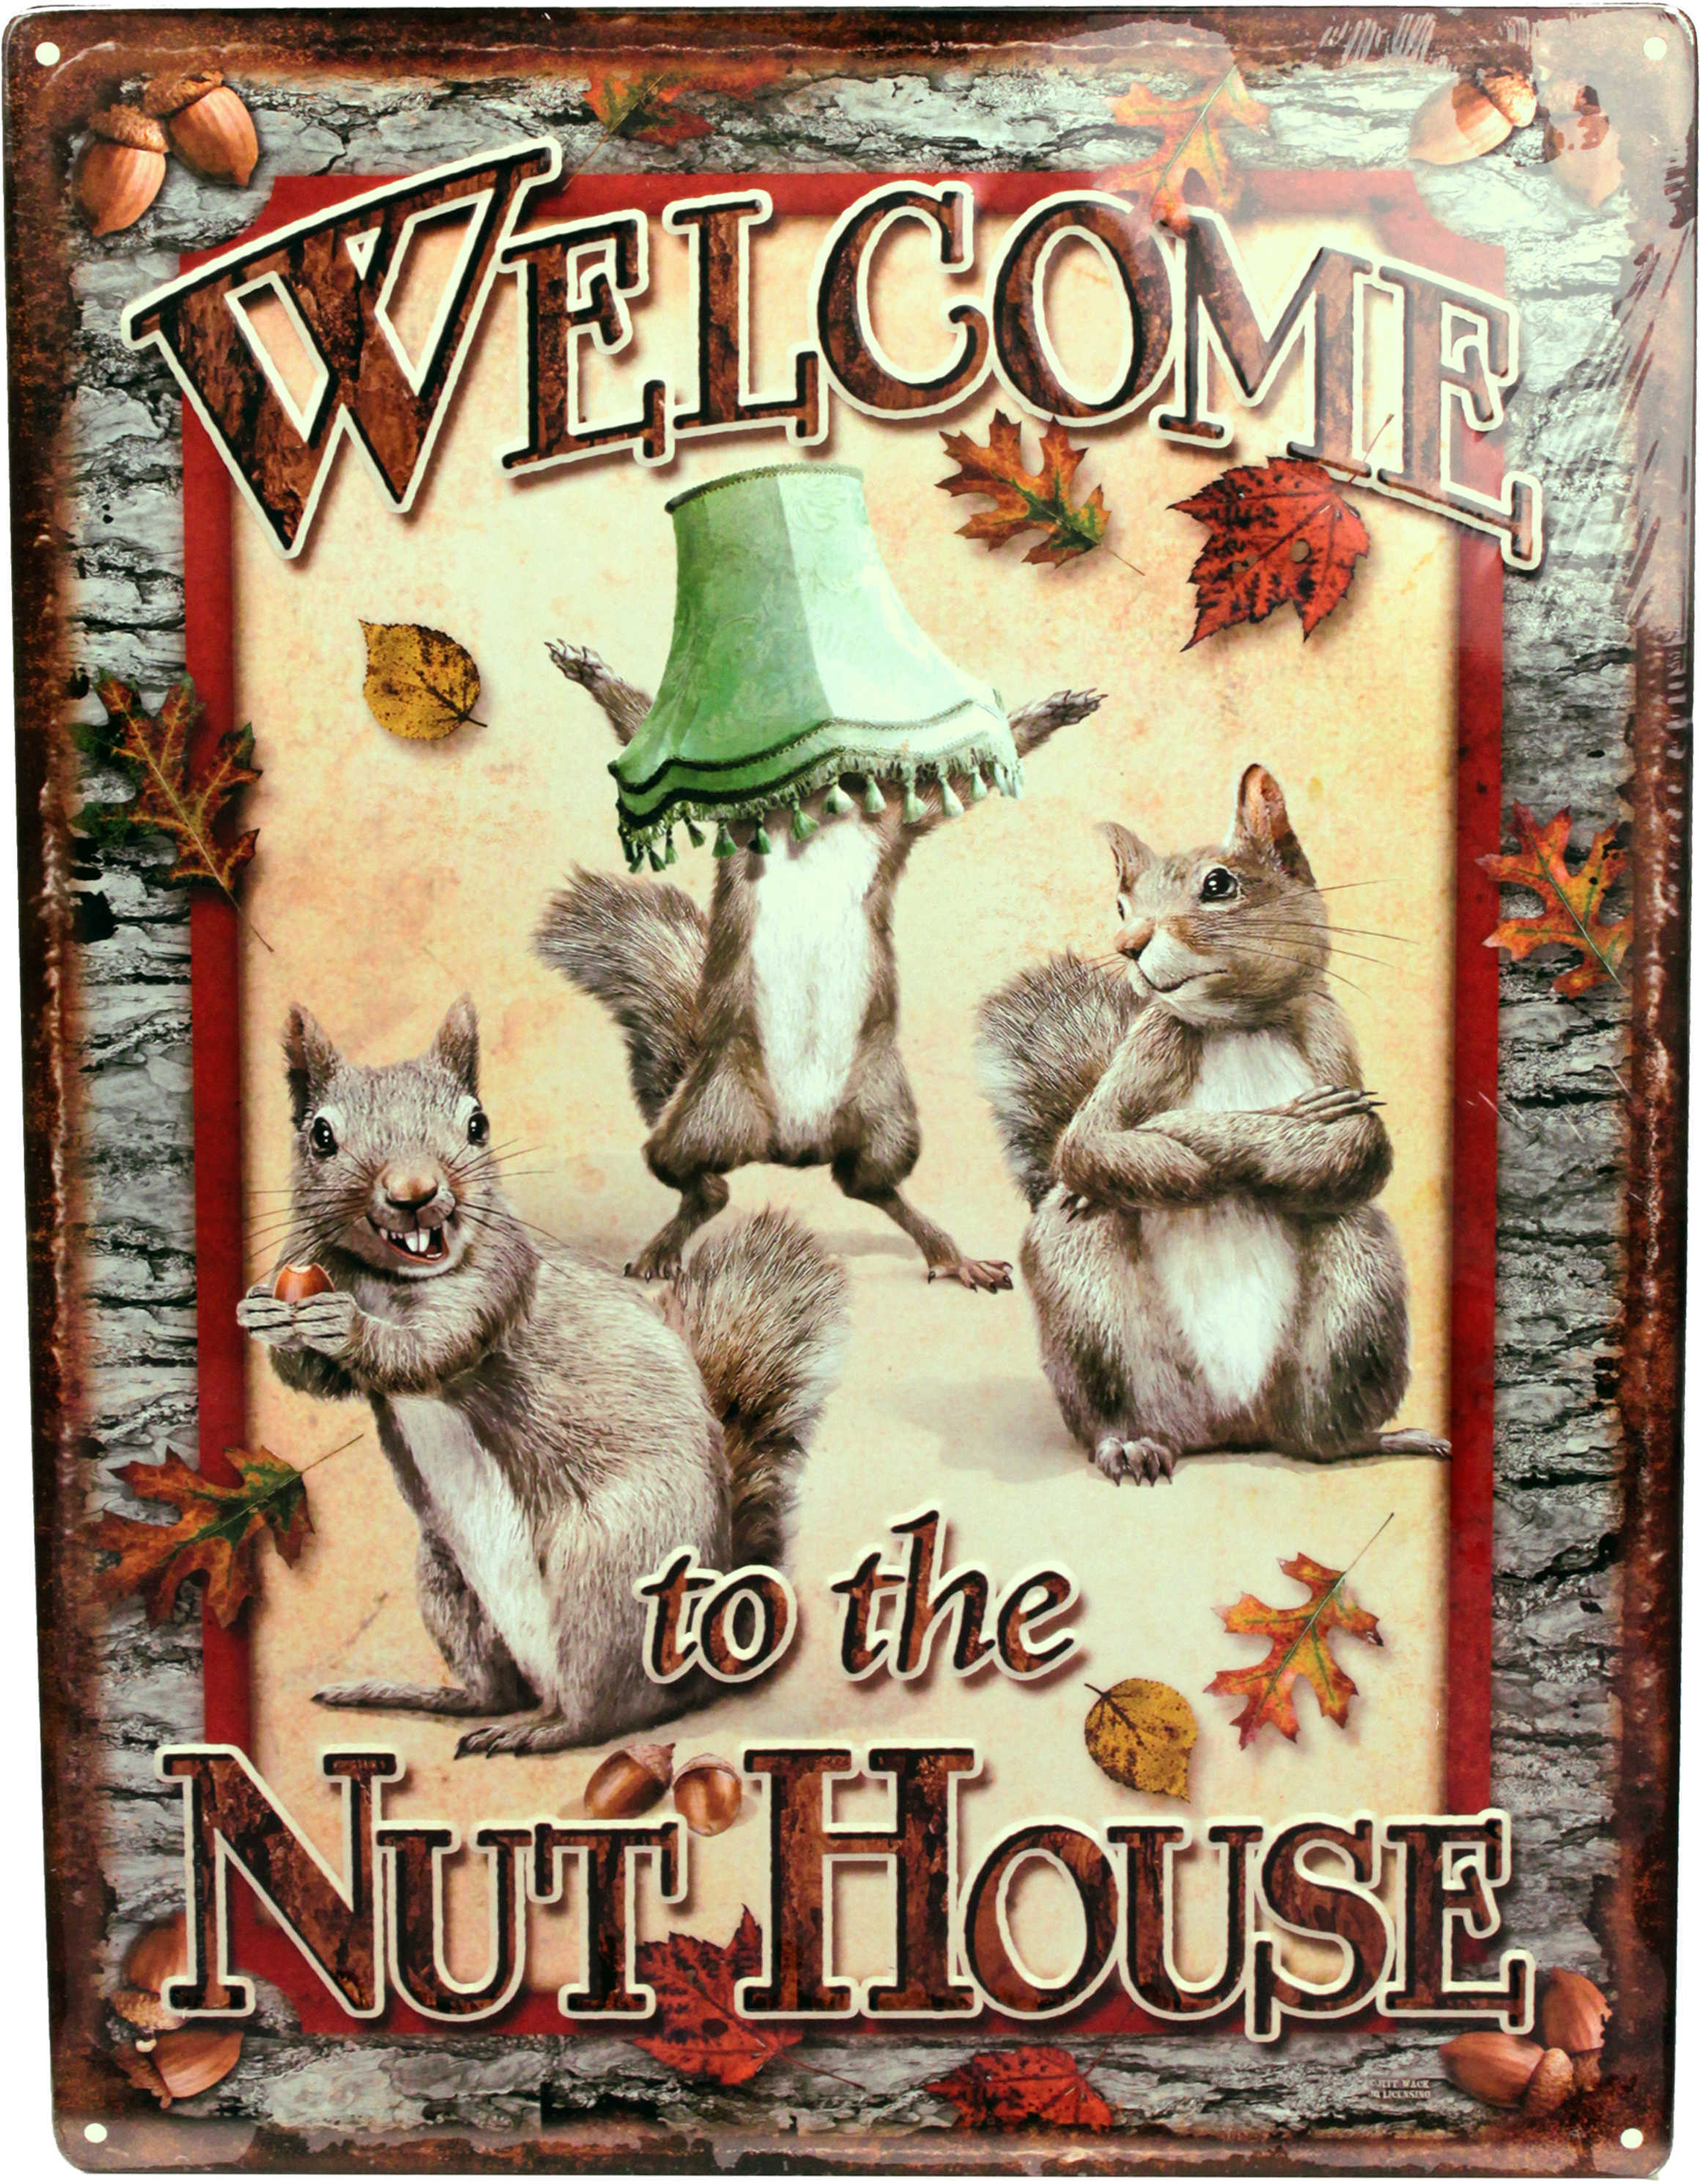 Rivers Edge Products 12" x 17" Tin Sign Nut House 1530